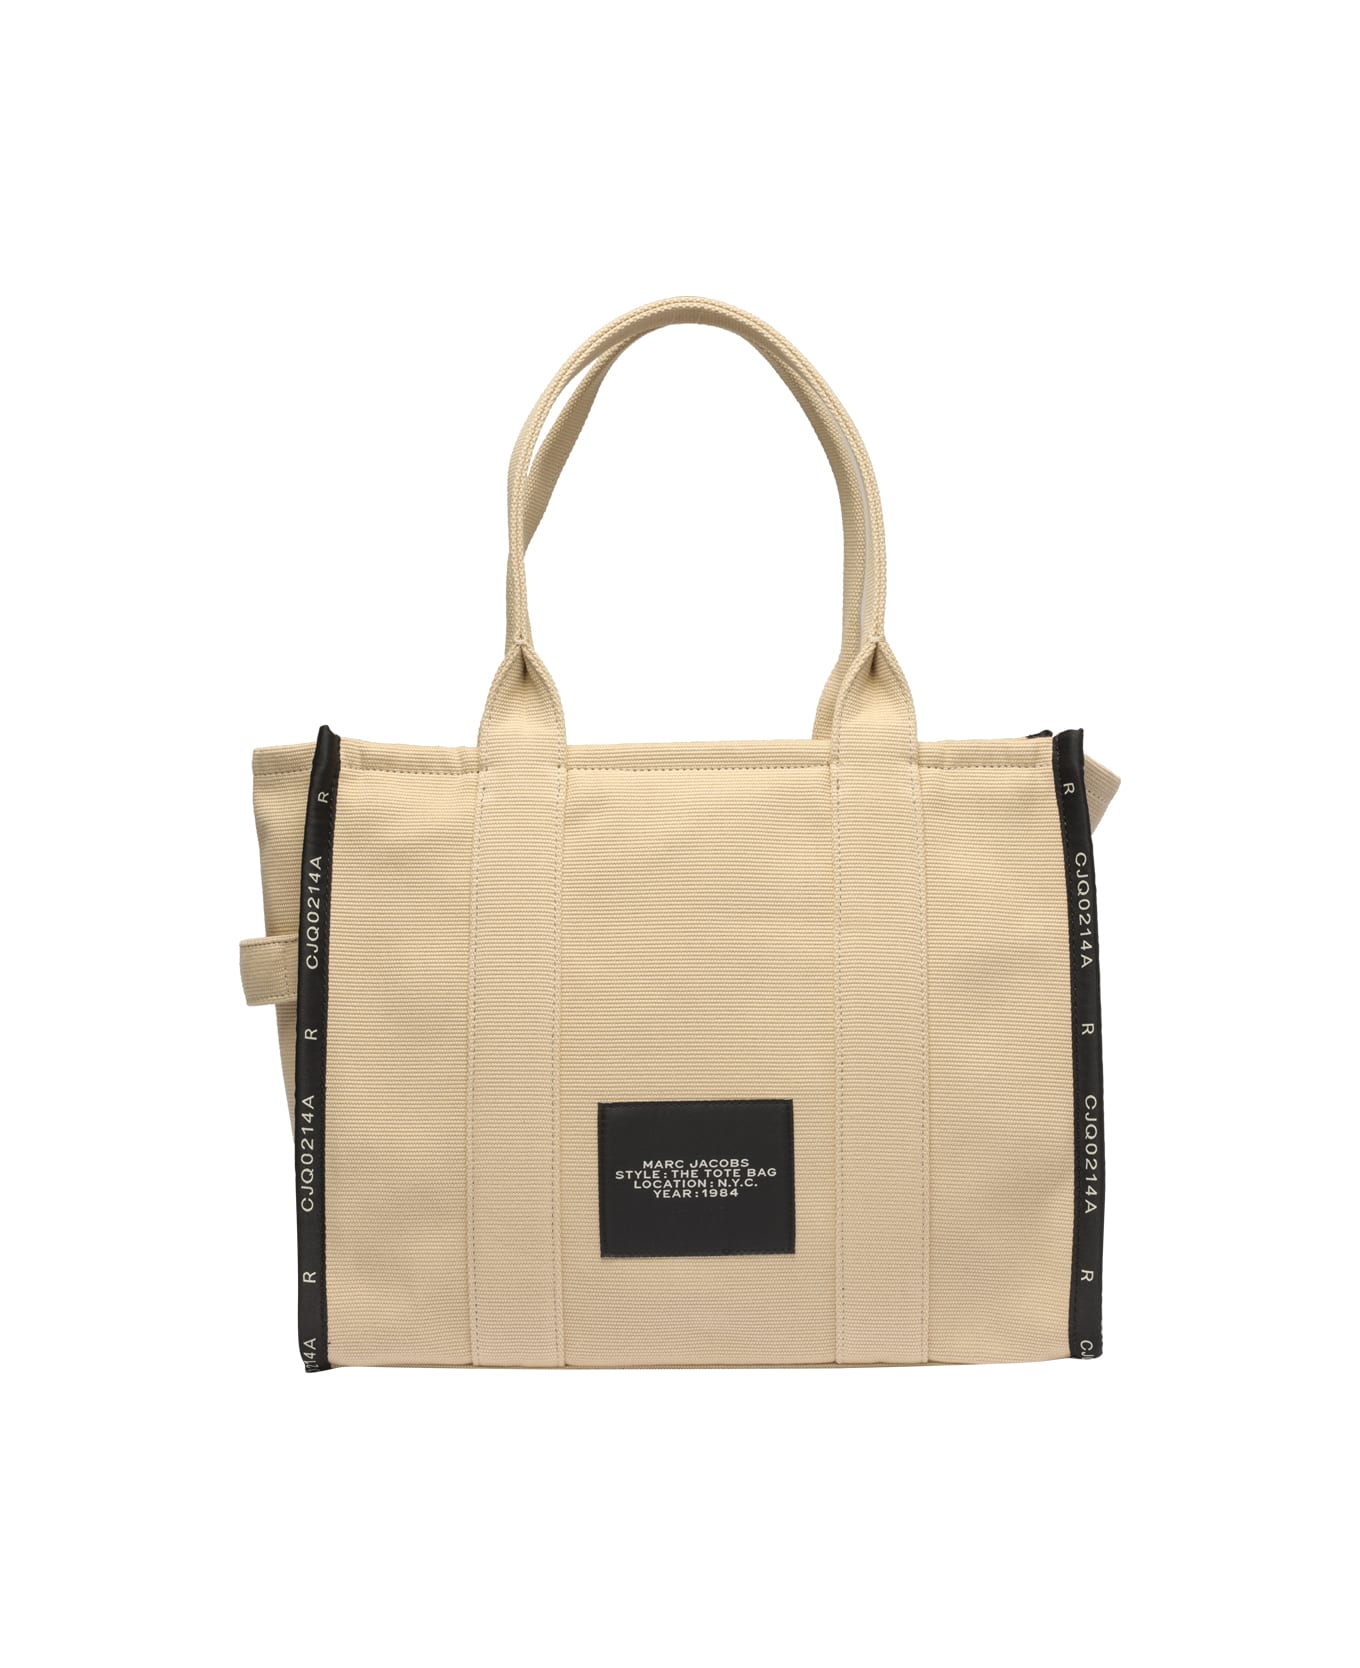 Marc Jacobs The Large Tote Bag - Beige